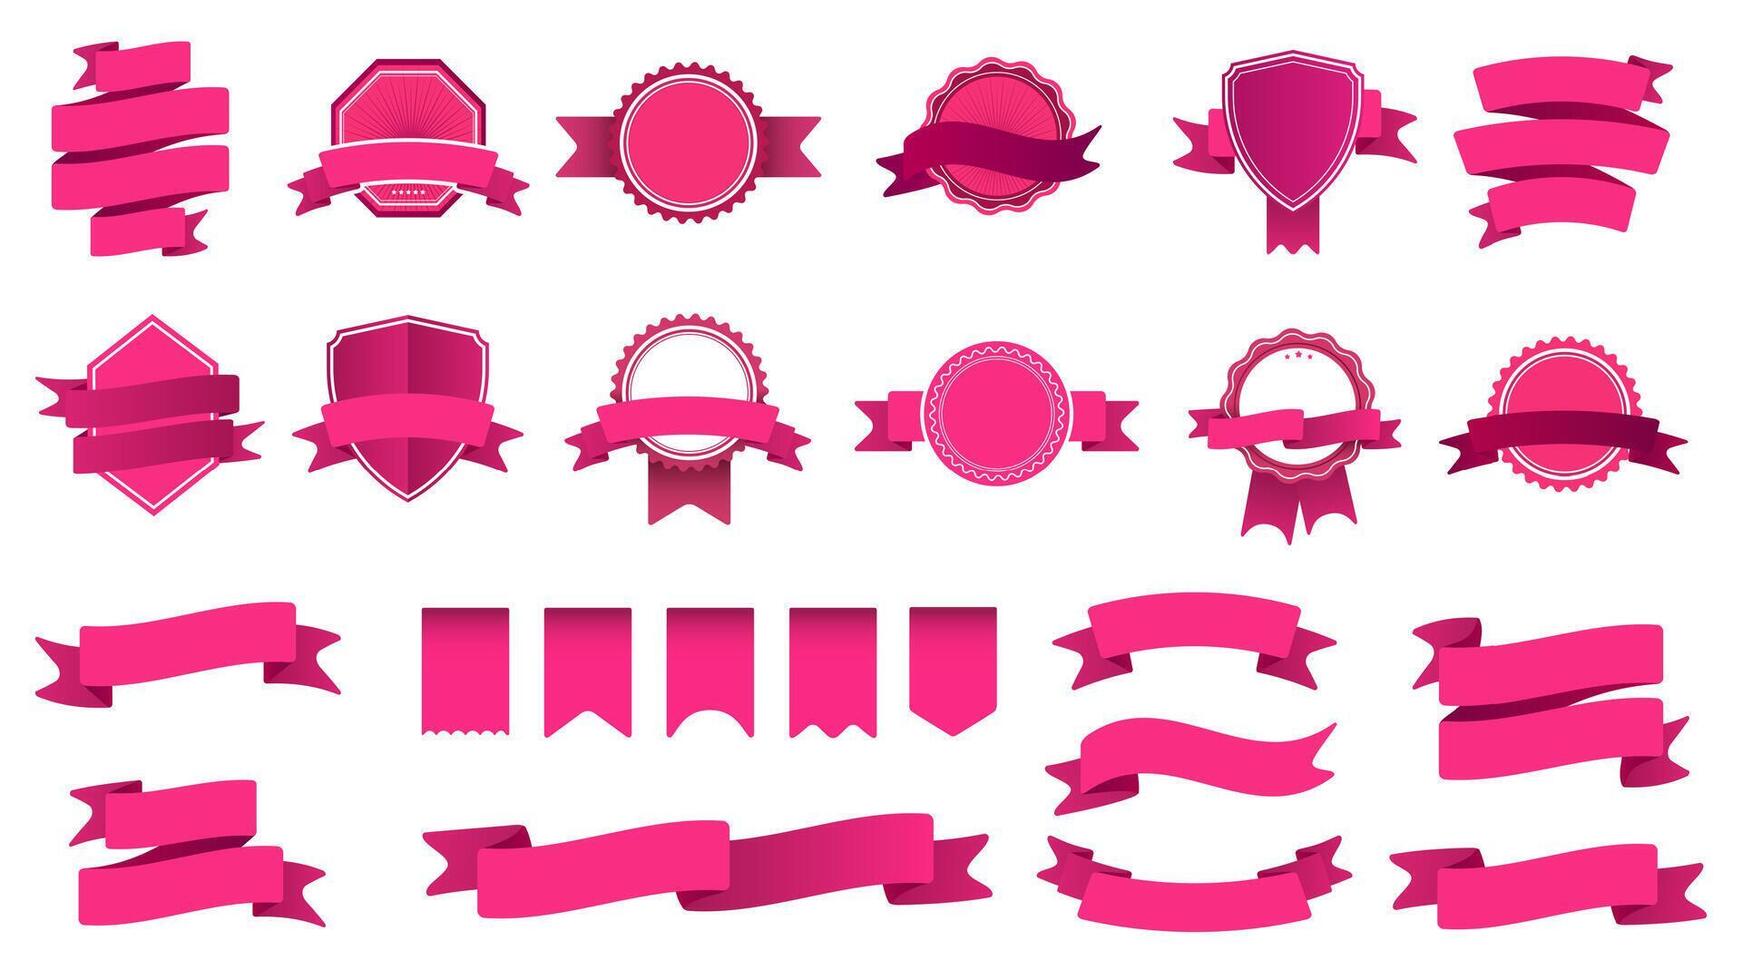 Ribbon banner badges. Frame with tape, abstract decorative shape badge and curved ribbons flat vector set. Collection of pink labels and stamps. Objects with banderole and pennants